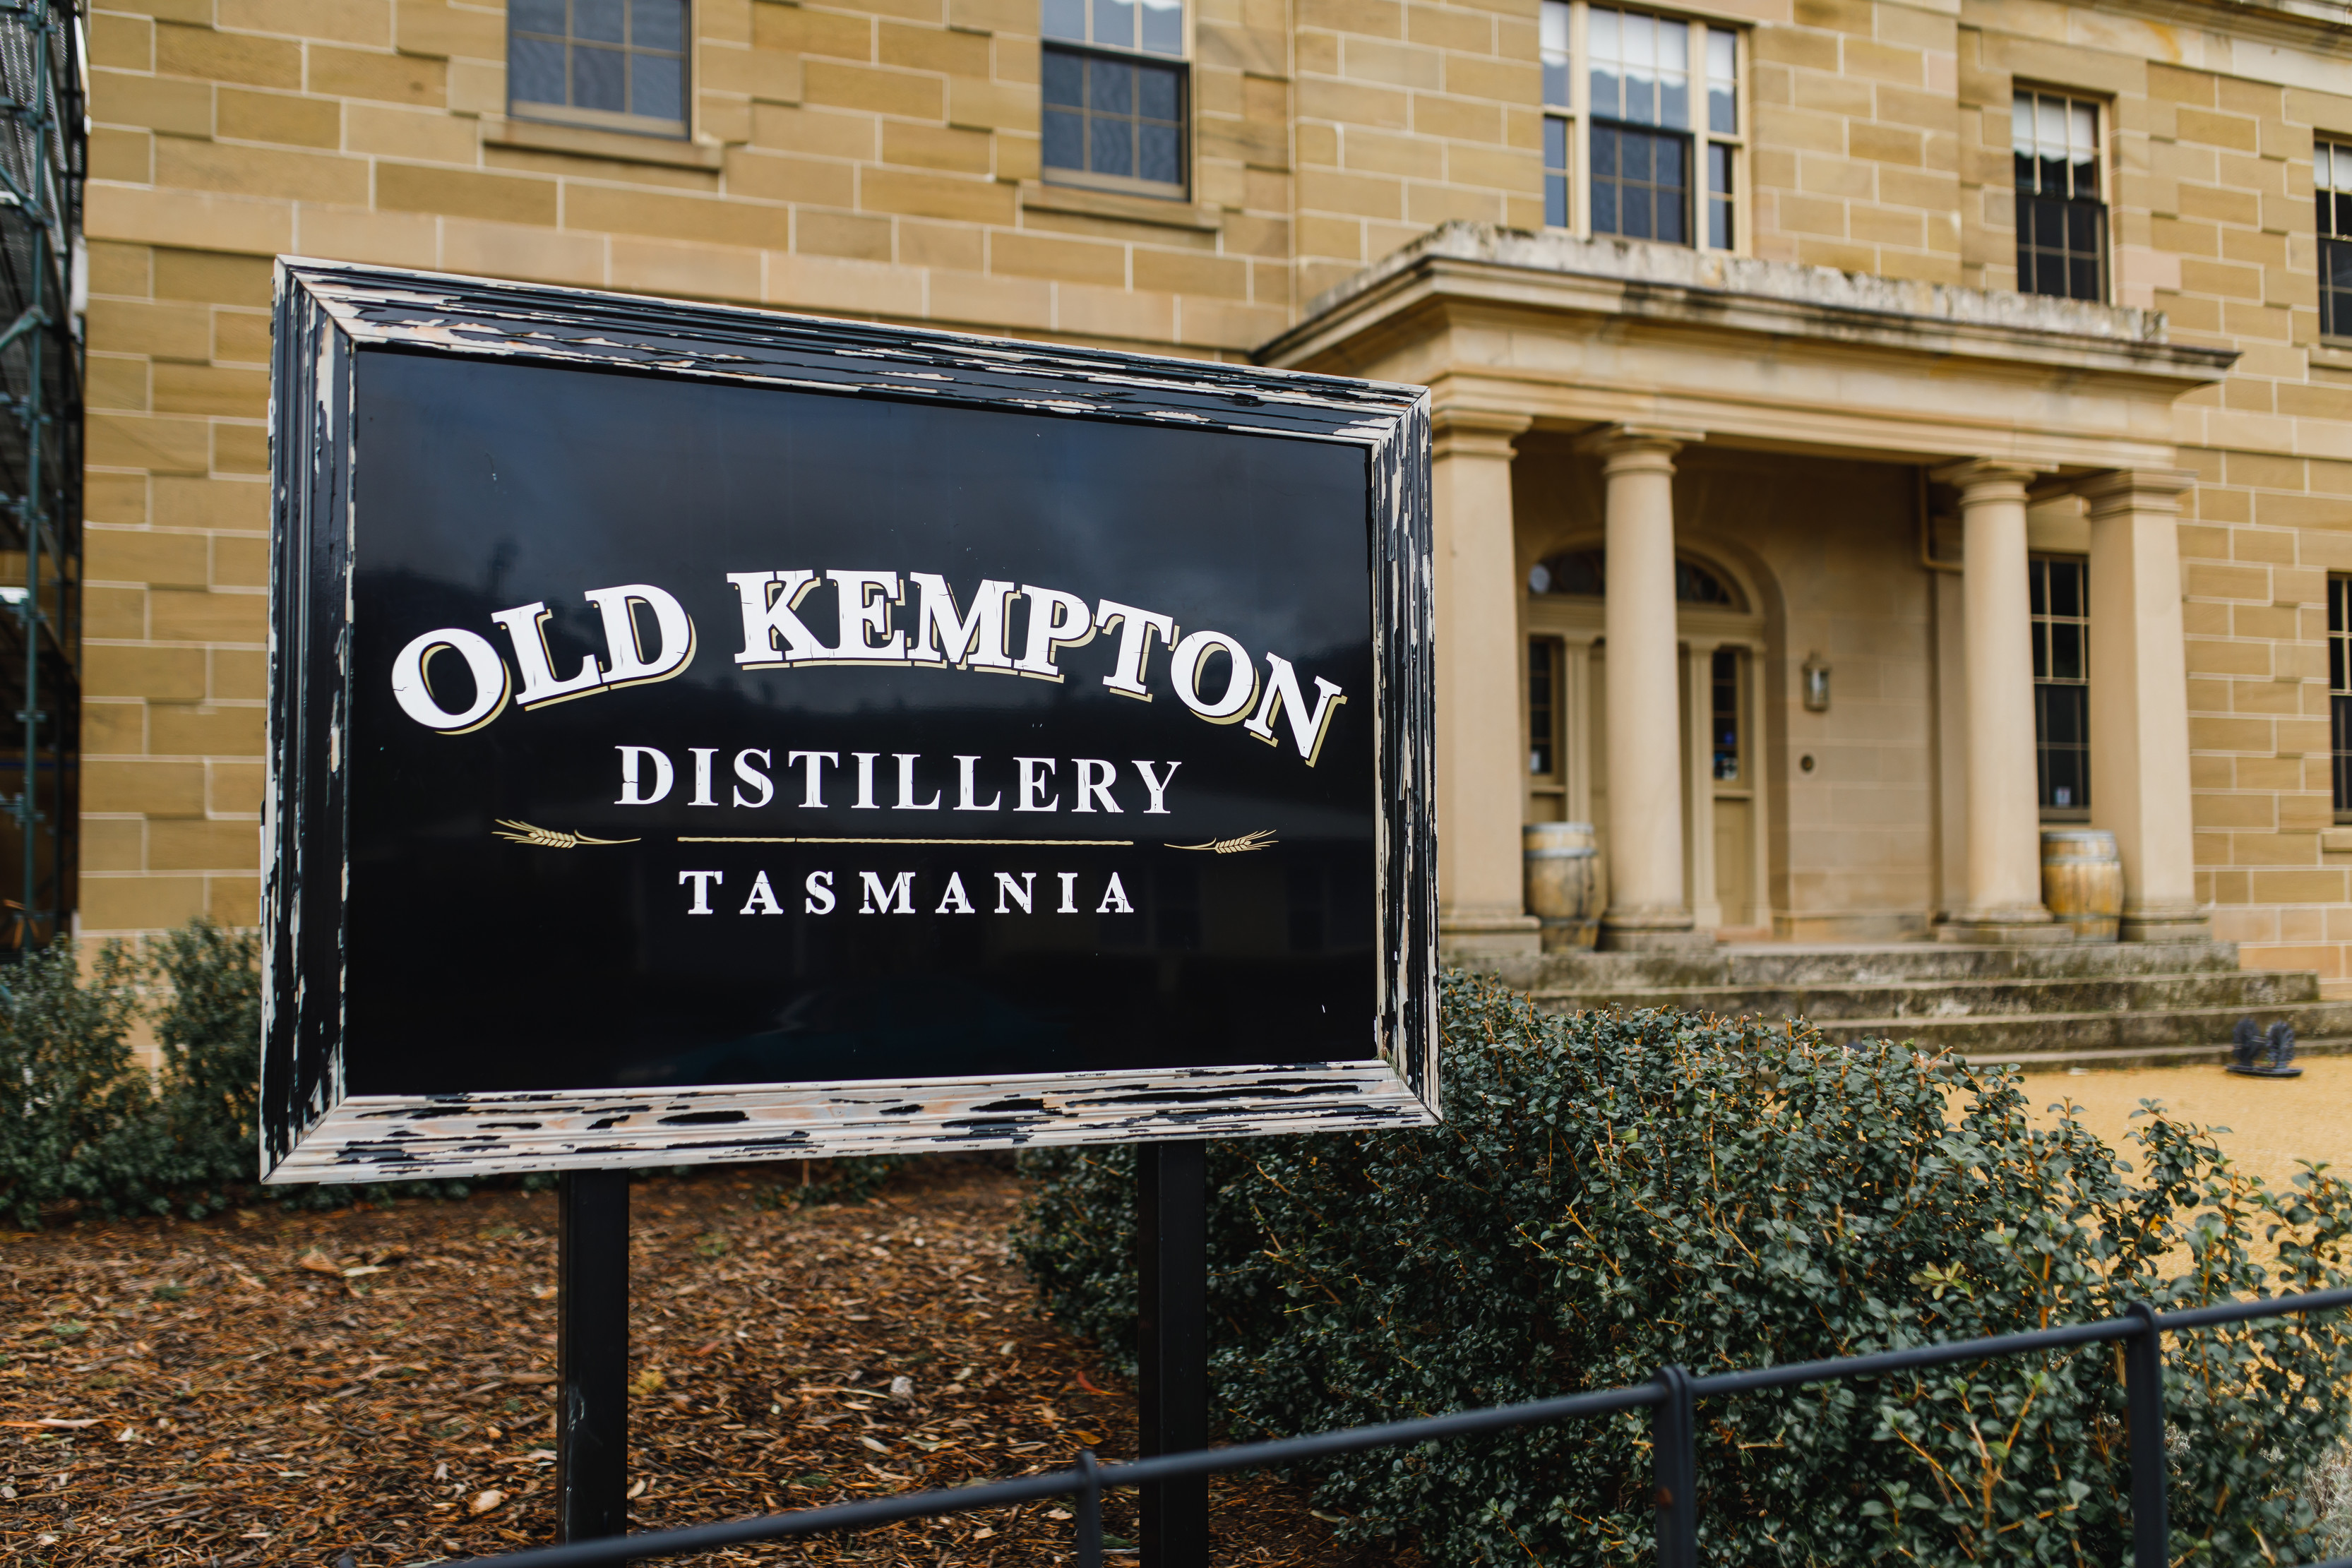 Old Kempton Distillery Tasmania signage at the front of the distillery.